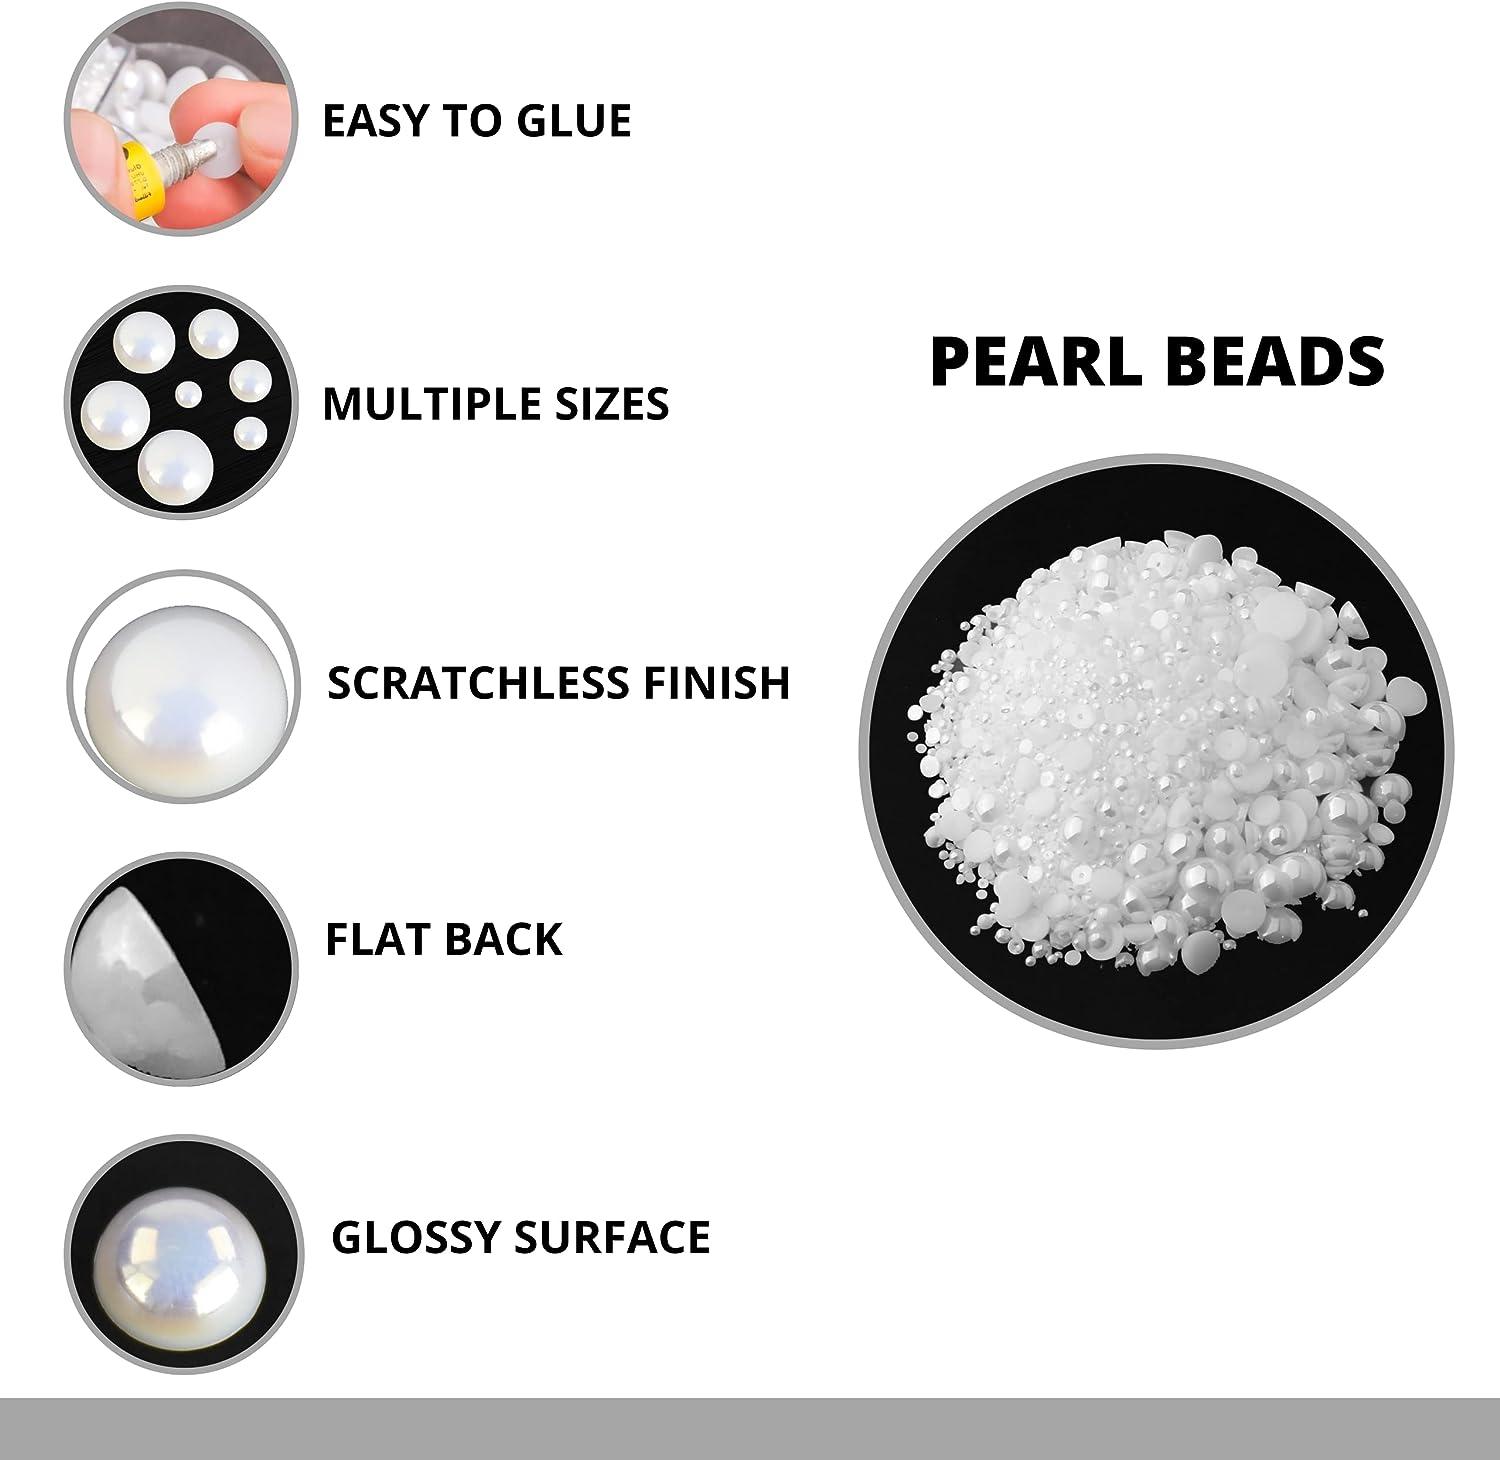 Articyard 5700 AB White Half Pearls for Crafts - Flatback Pearls/Jewels  Pearls for Nails DIY Accessory Art and Fashion Projects - Neatly Organized  Craft White Pearls for Makeup and Creative People